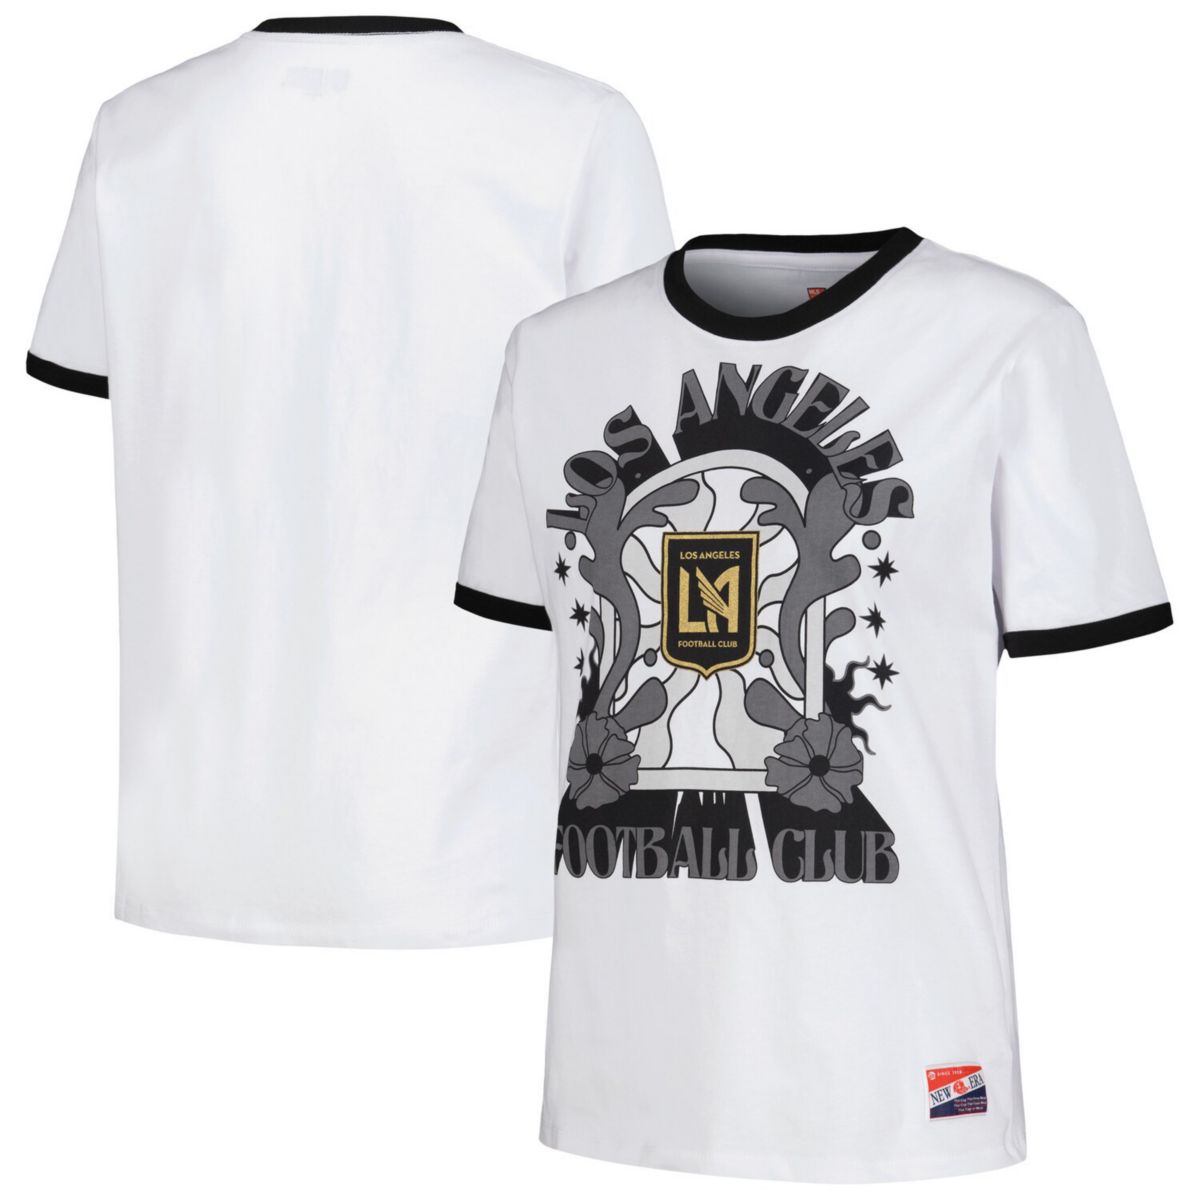 Women's 5th & Ocean by New Era White LAFC Throwback Ringer T-Shirt 5th & Ocean by New Era